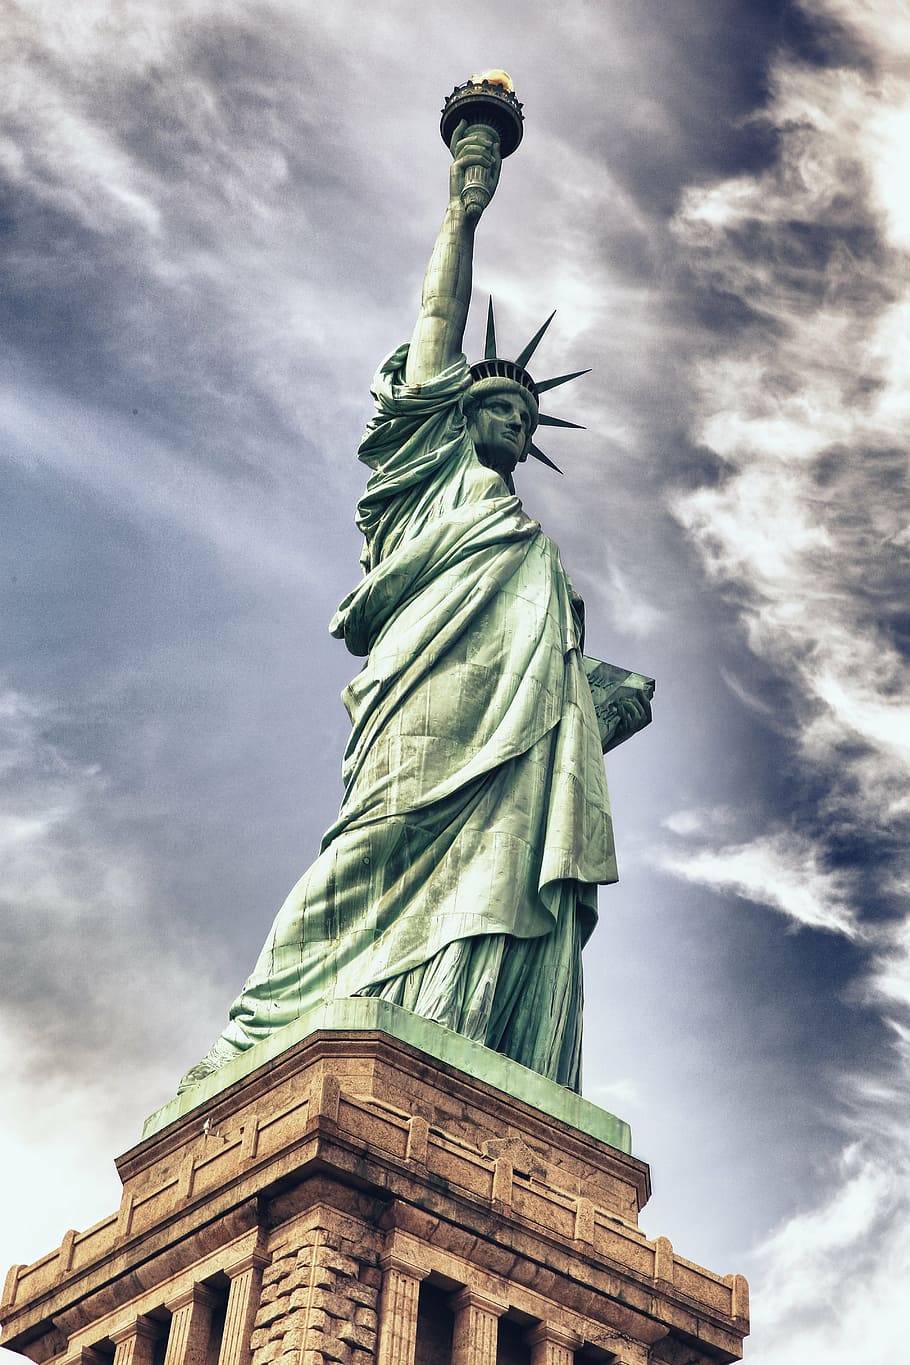 Statue of Liberty, New York, photography, architecture, dom, independence